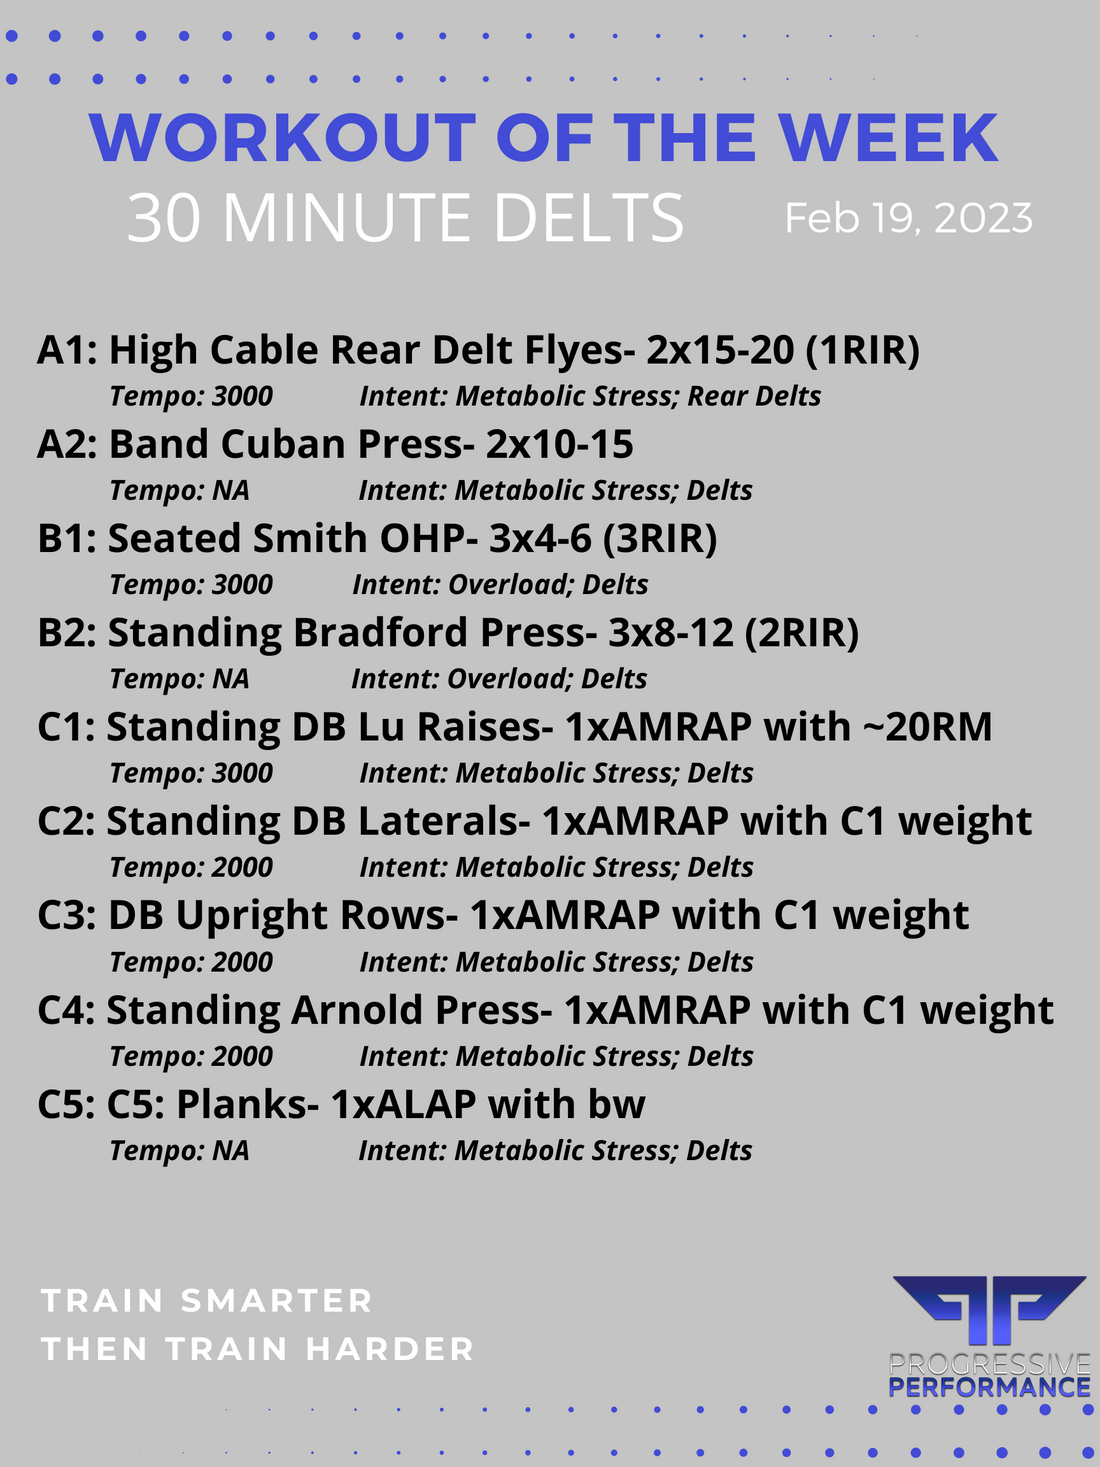 30 Minute Delts